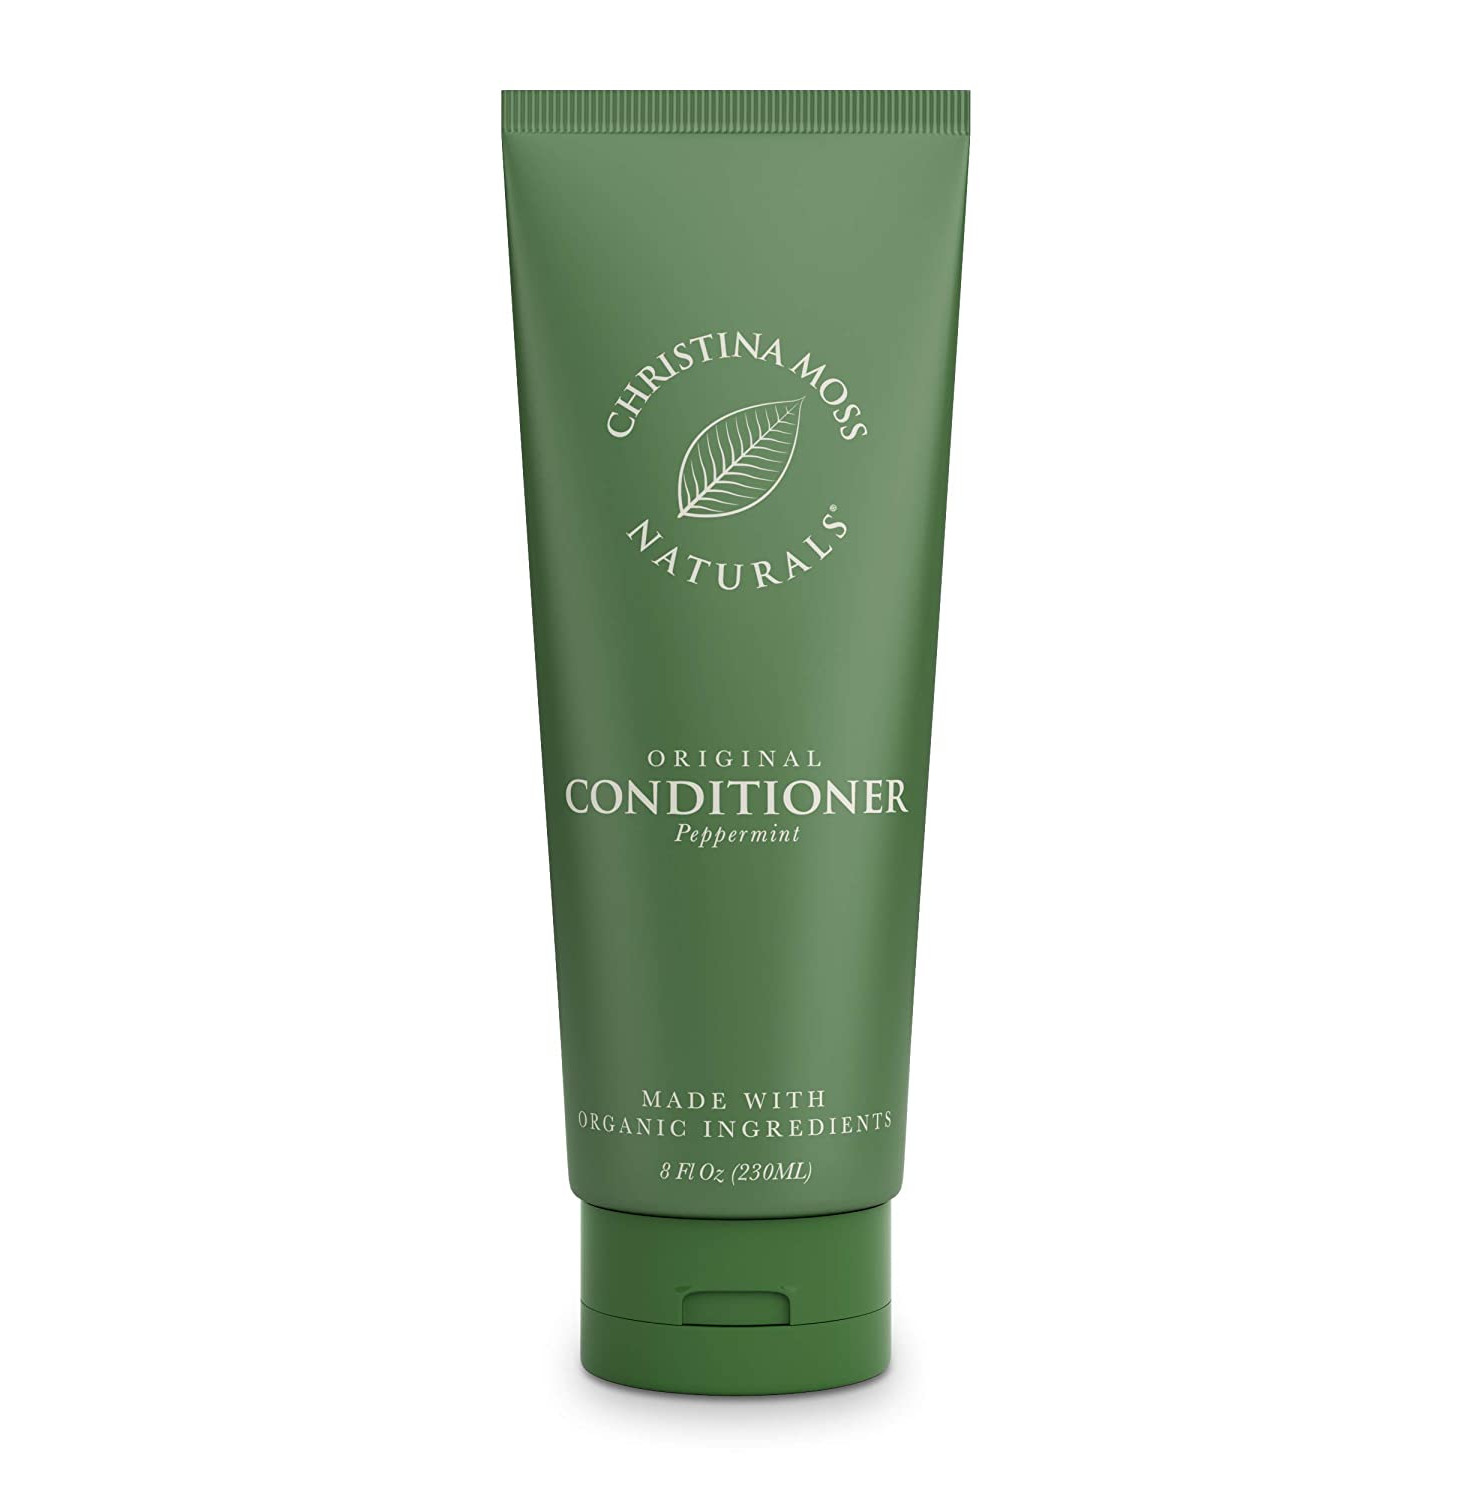 Christina Moss Organic Conditioner review and 10% off promo code